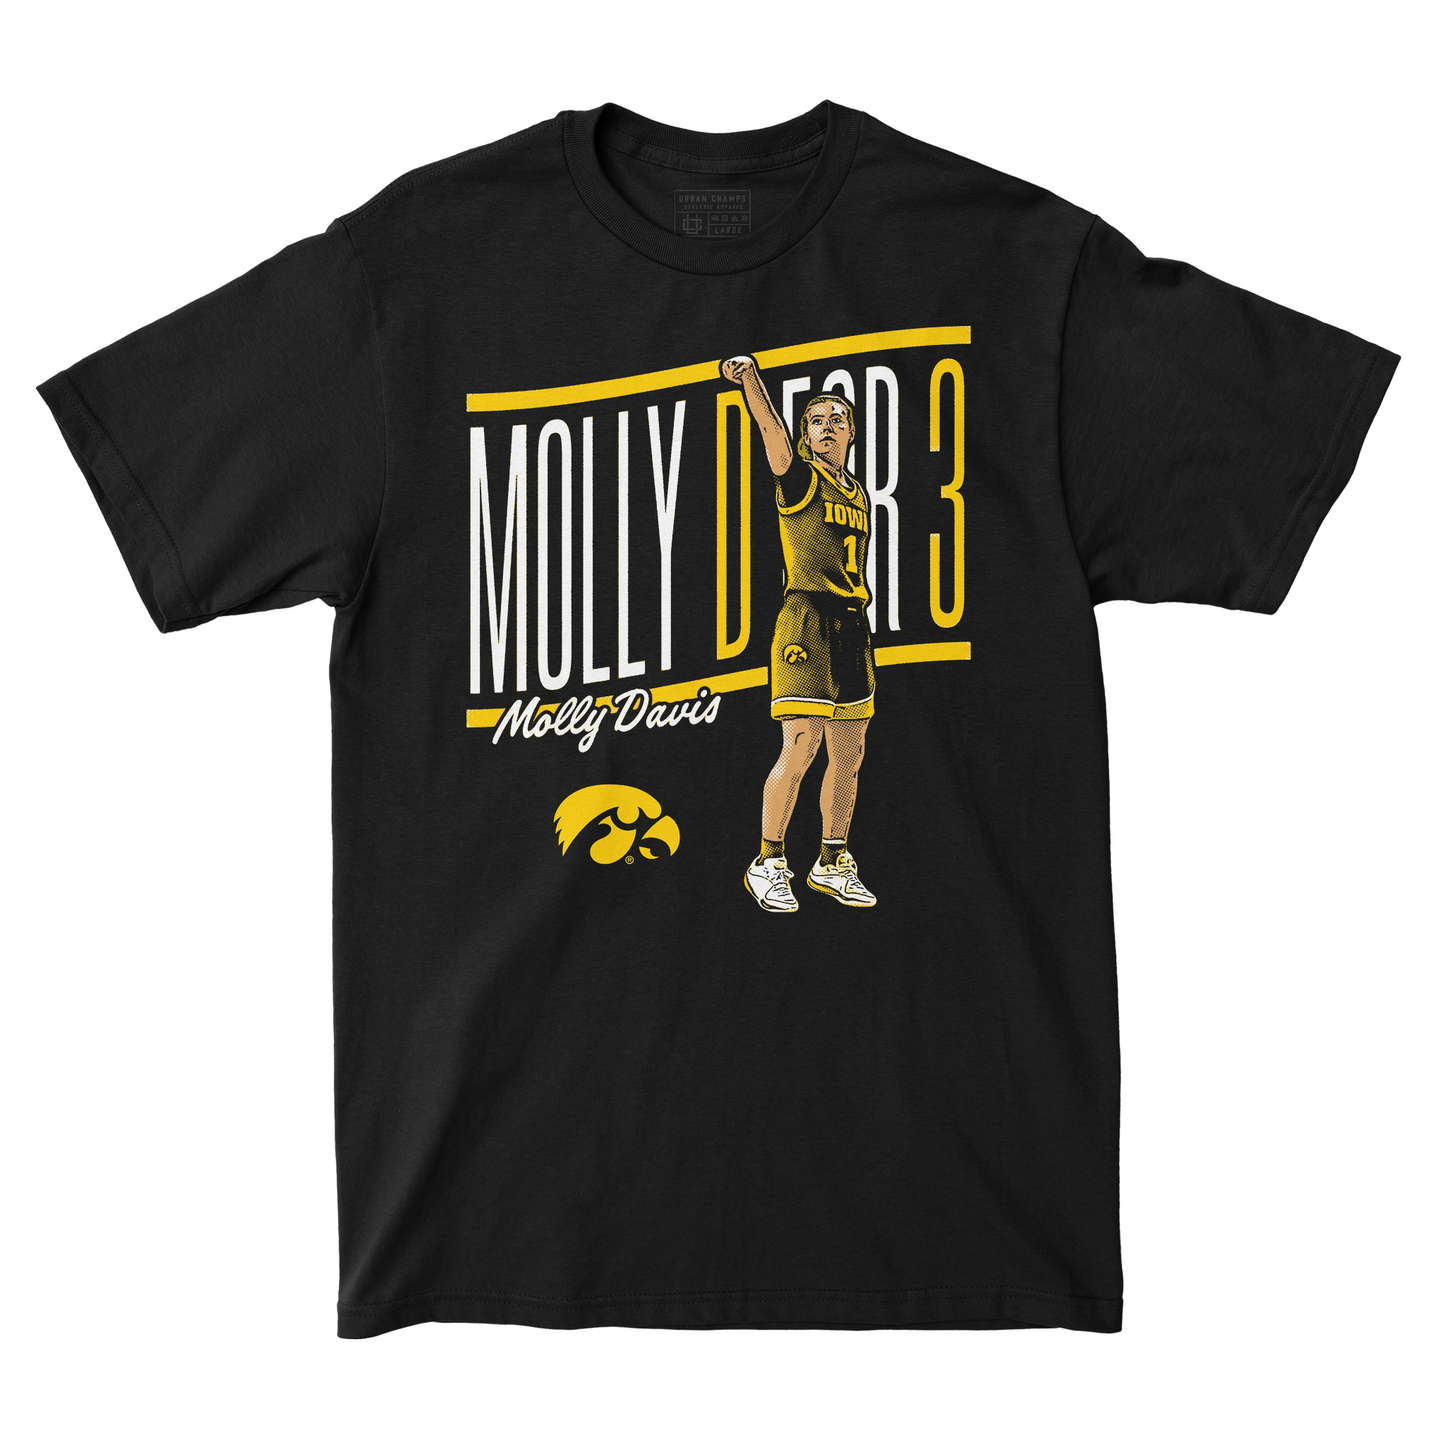 EXCLUSIVE RELEASE: Molly D For 3! Tee